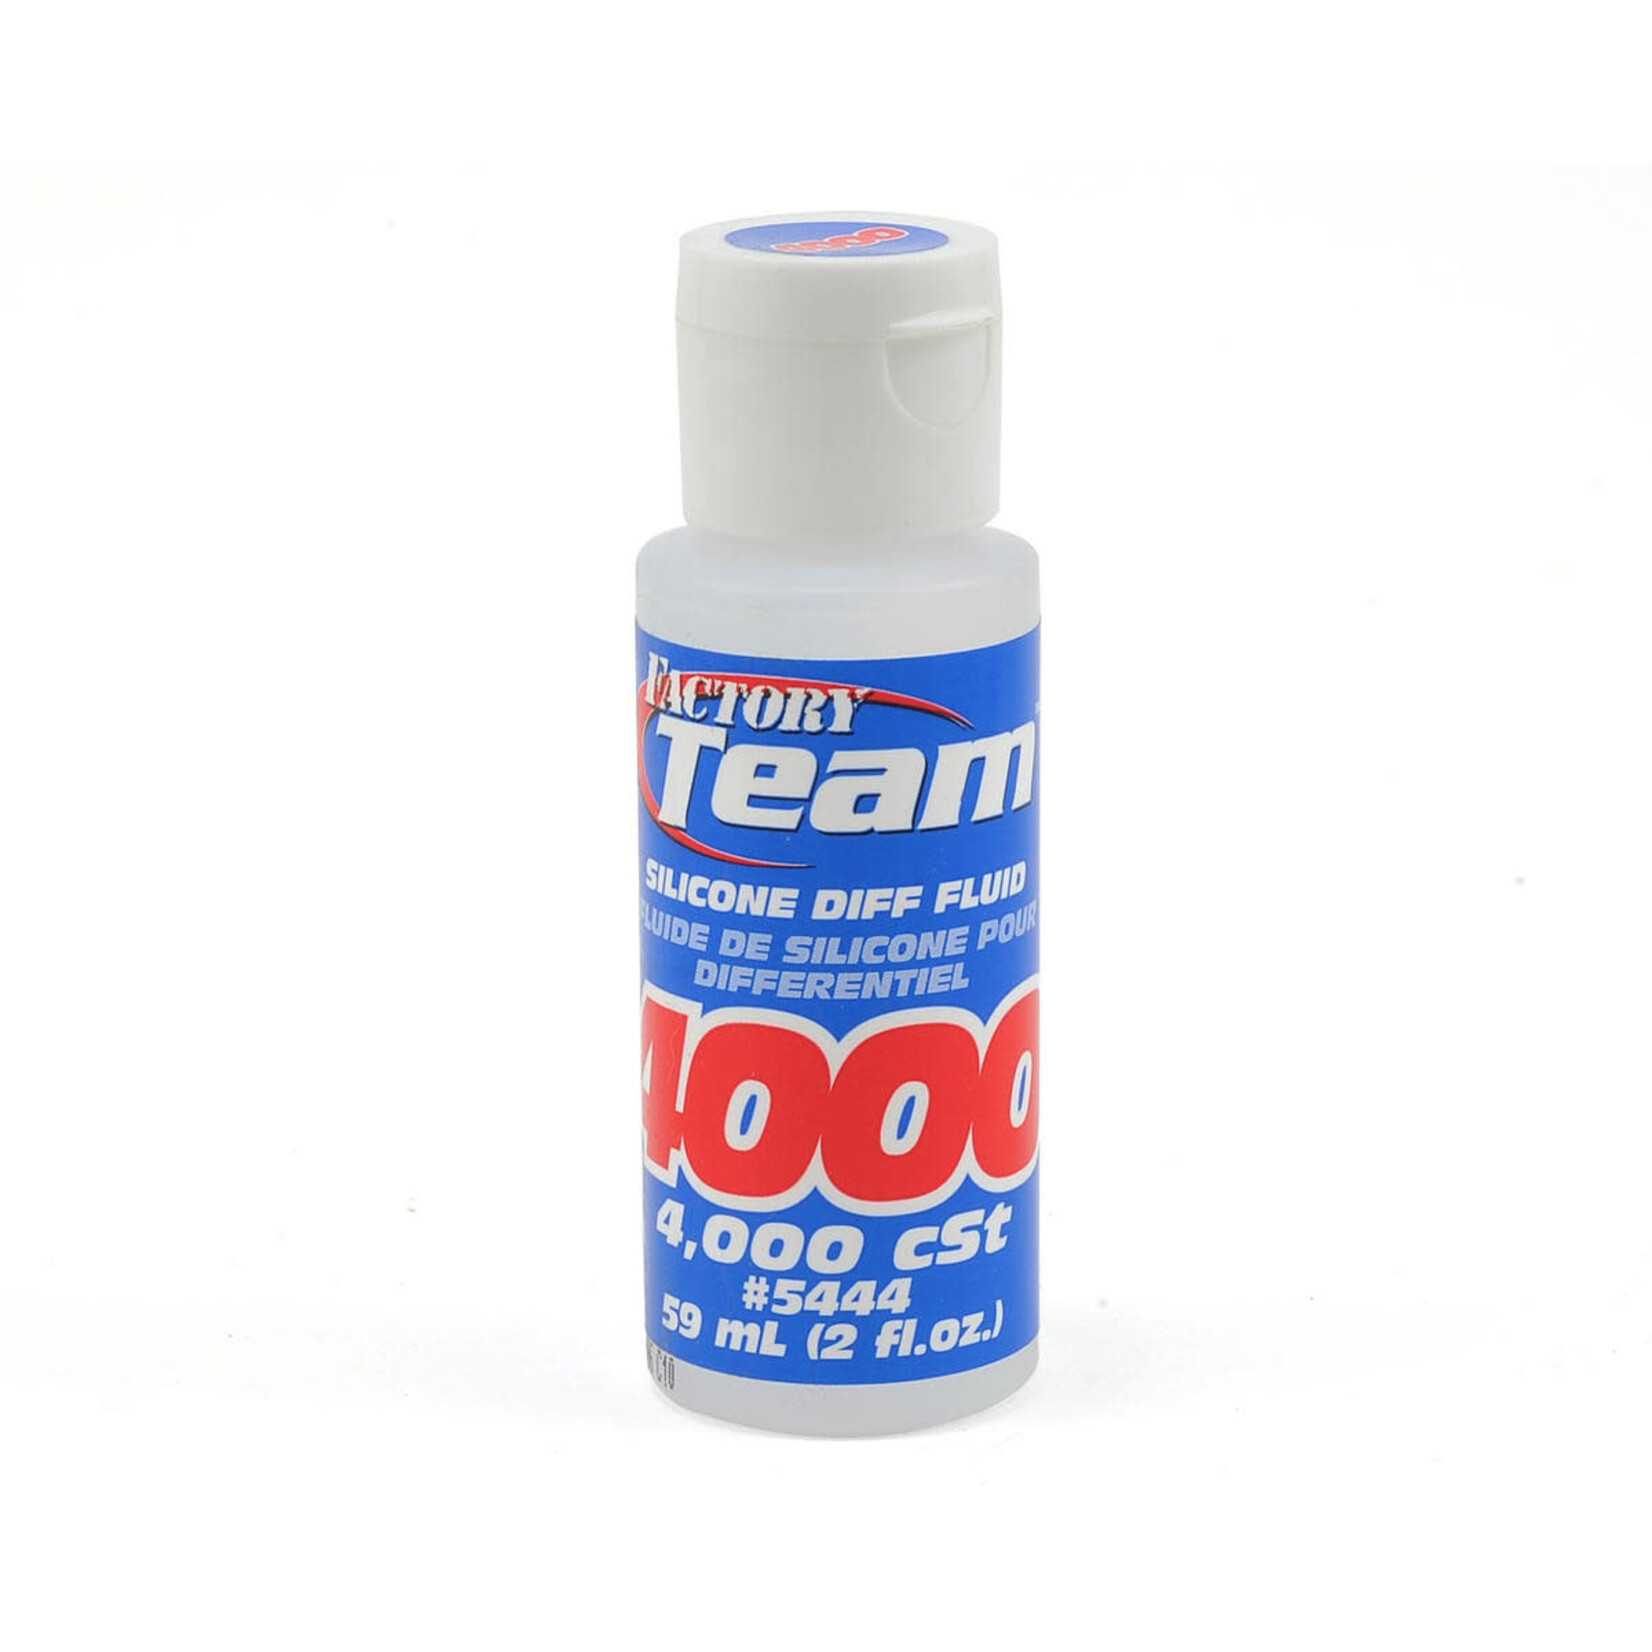 Factory Team Team Associated Silicone Differential Fluid (2oz) (4,000cst) #5444